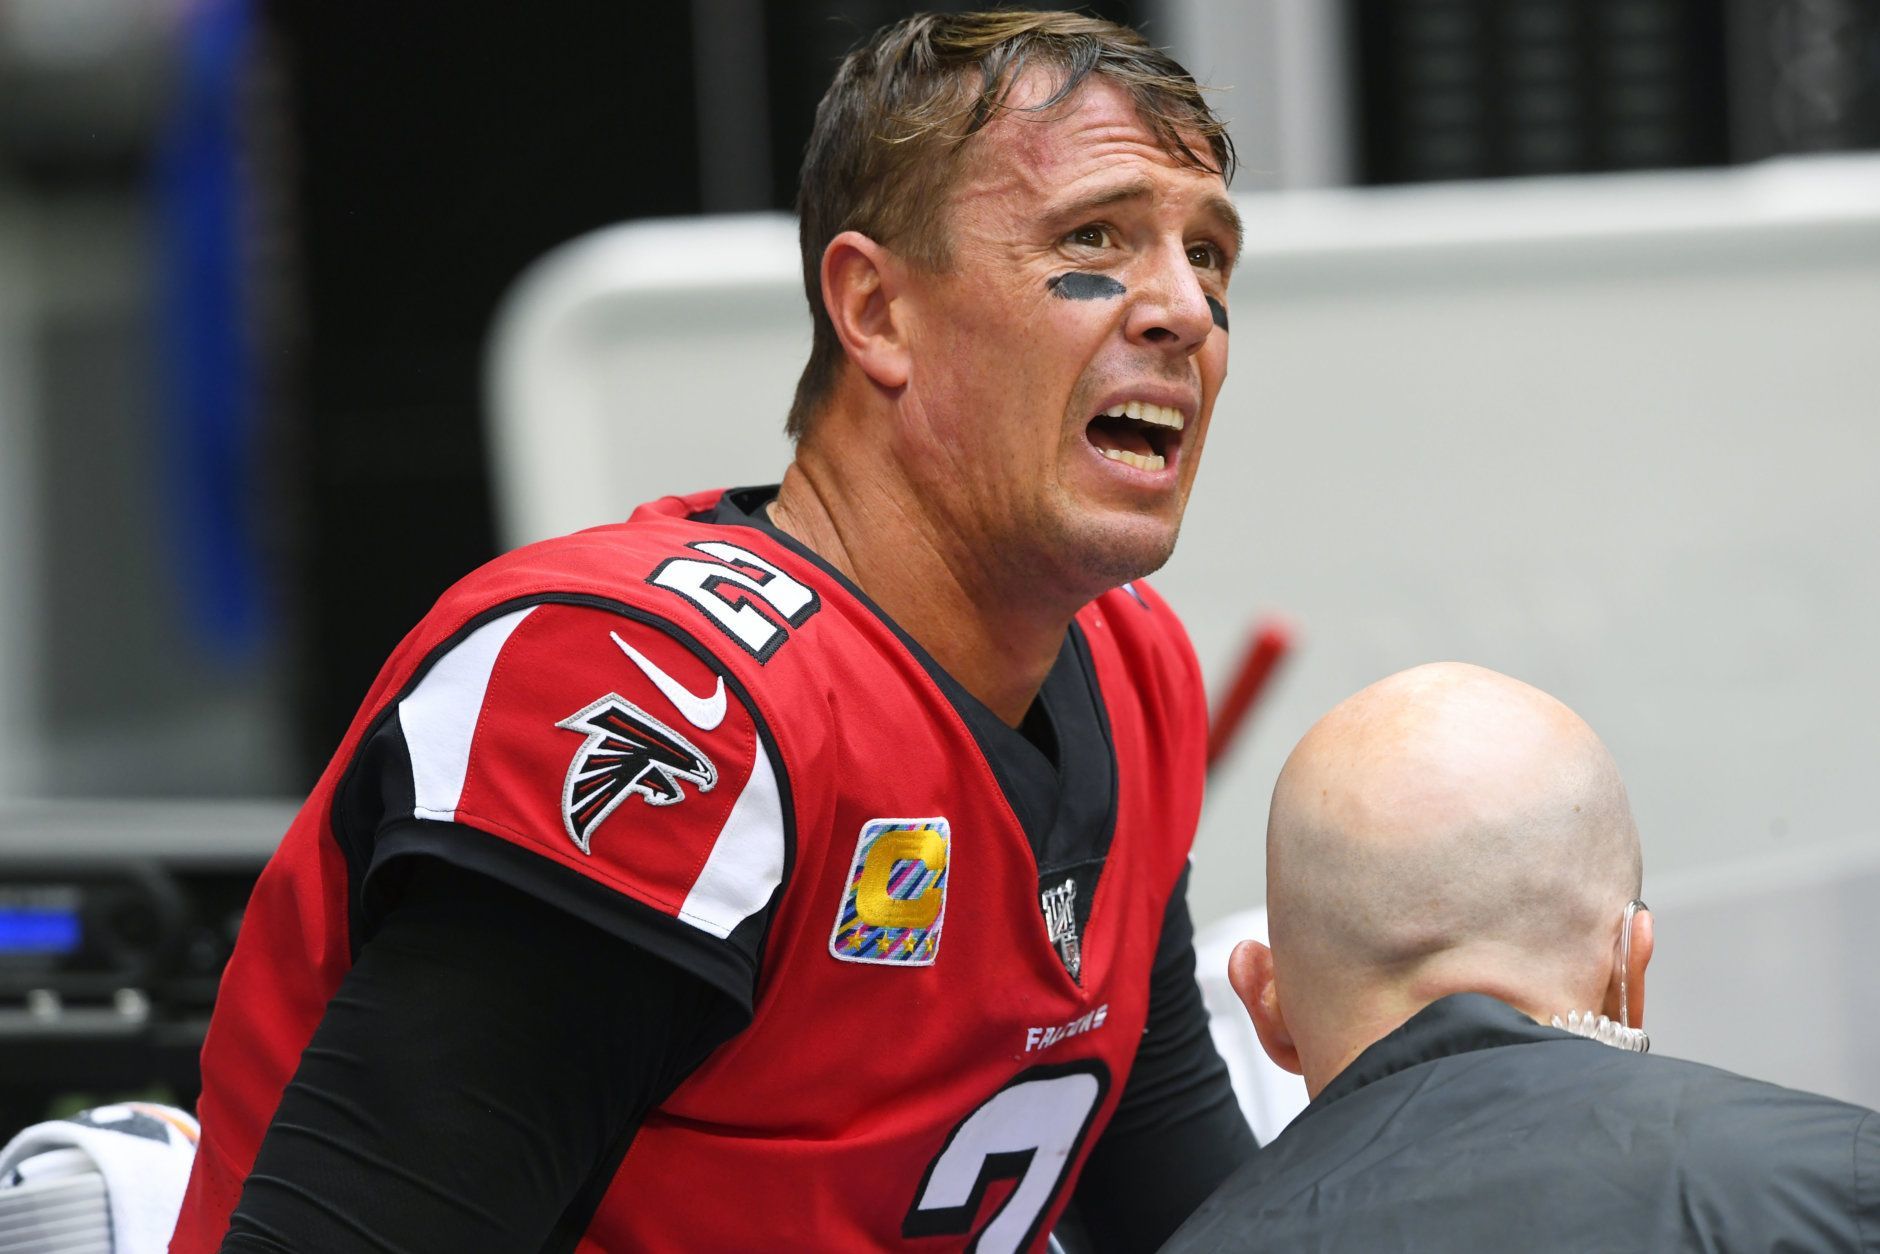 <p><b>Most Disappointing Team: Atlanta Falcons</b></p>
<p>Mostly for the purposes of my pride and reputation, this is the last time I&#8217;ll reference <a href="https://wtop.com/gallery/nfl/2019-nfl-playoff-predictions/" target="_blank" rel="noopener">picking Atlanta to win the Super Bowl</a>. A team with former MVP Matt Ryan, a newly paid Julio Jones and returning defensive stars Deion Jones and Keanu Neal should at least win more games than it loses. Neal is the only one out for the season, so the Falcons&#8217; bottom-out season is that much more perplexing.</p>
<p><i>Honorable mention: Cleveland Browns, New York Jets, Chicago Bears</i></p>
